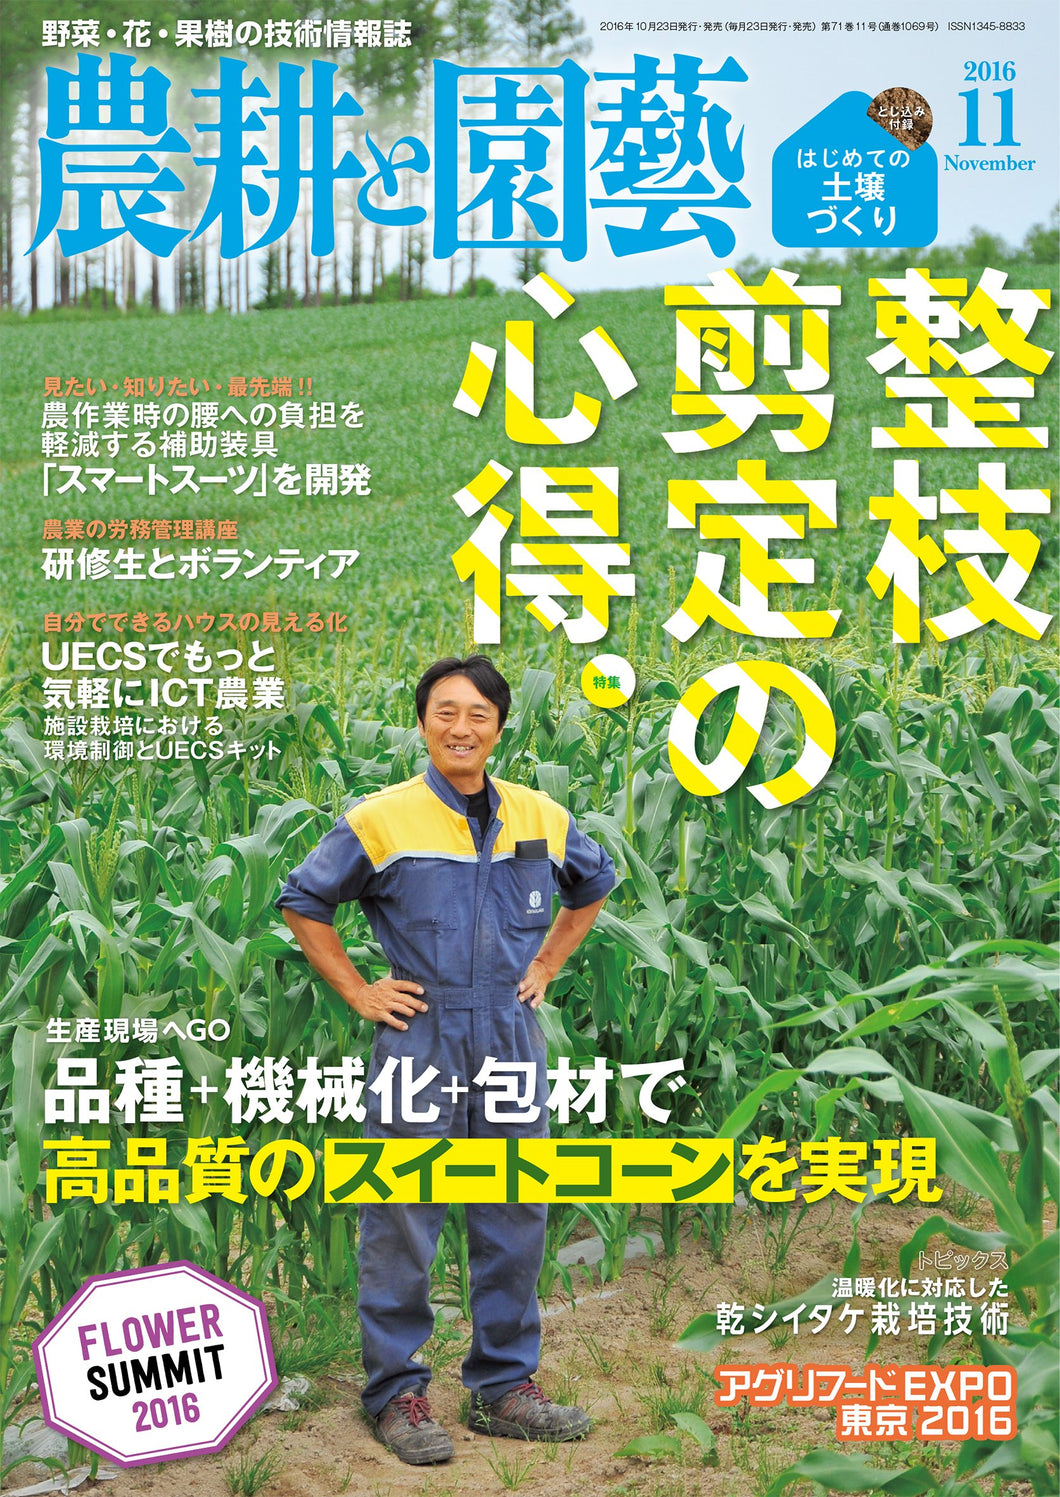 Agriculture and Horticulture, November 2016 <Insert appendix>